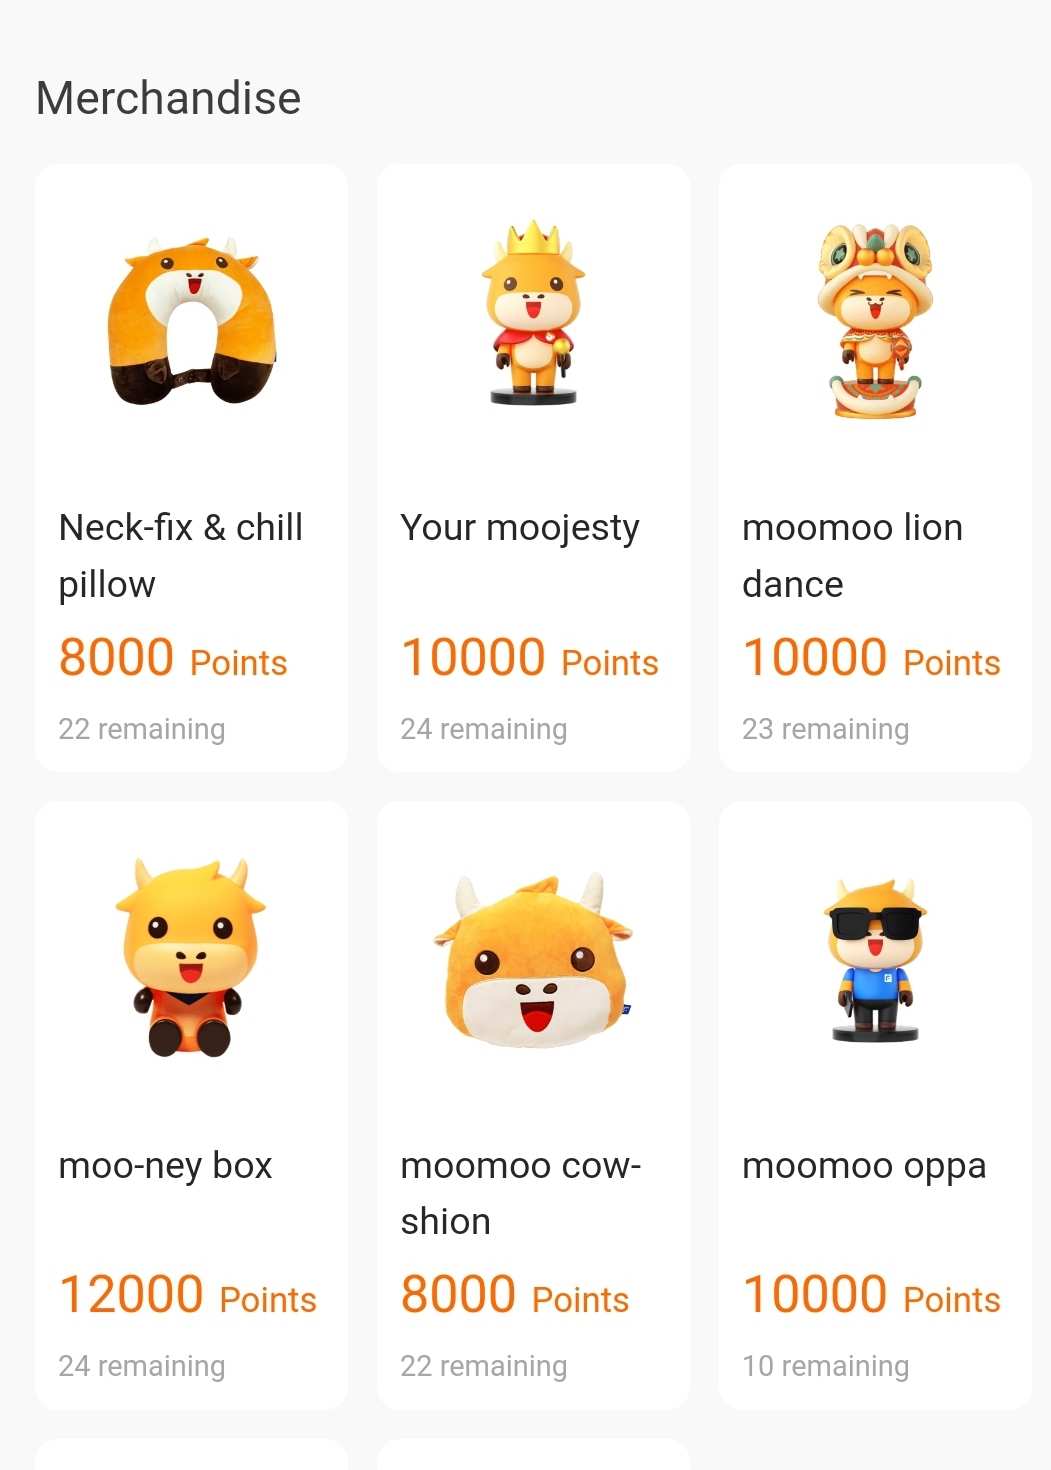 Enquiries for moomoo March 2022 merchandise rewards in up co